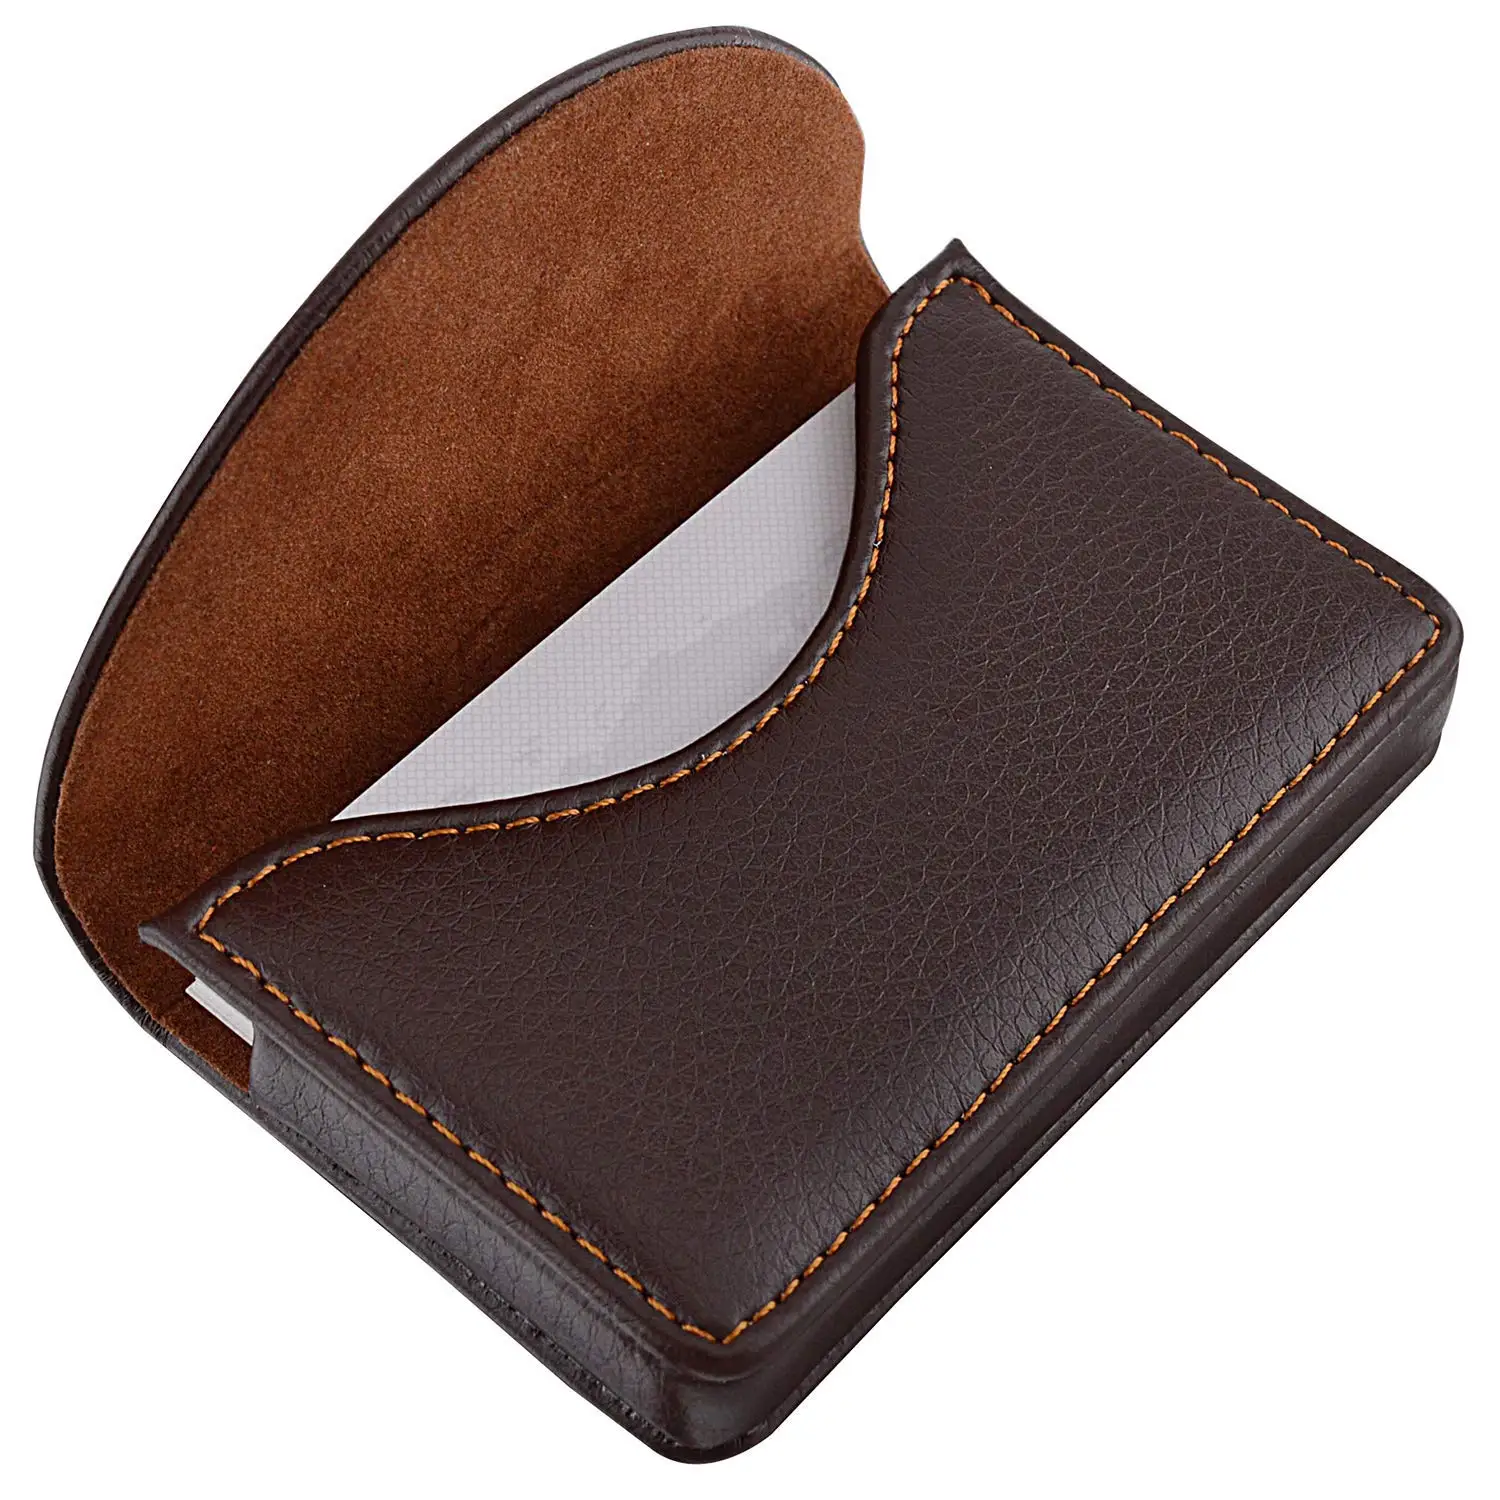 Leather Business Card Holder Case For 